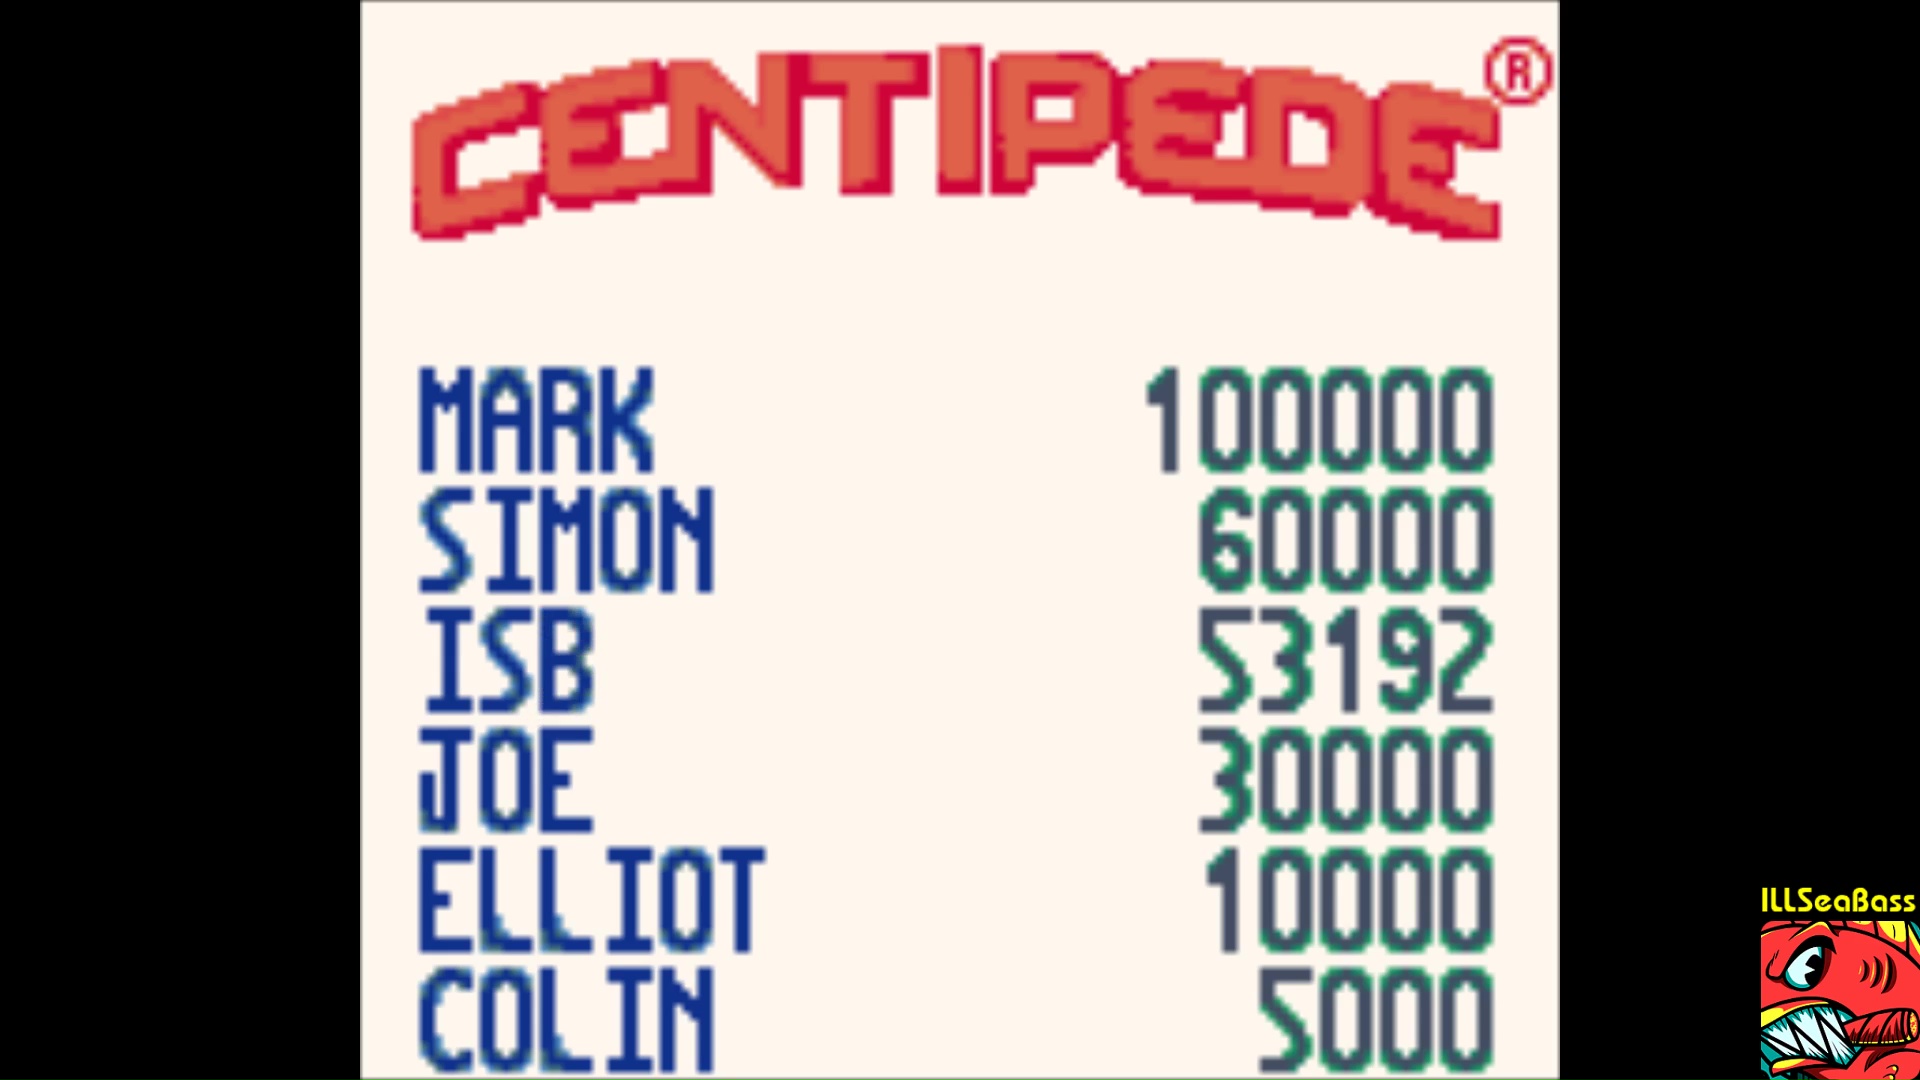 ILLSeaBass: Centipede (Game Boy Color Emulated) 53,192 points on 2018-01-19 22:42:30